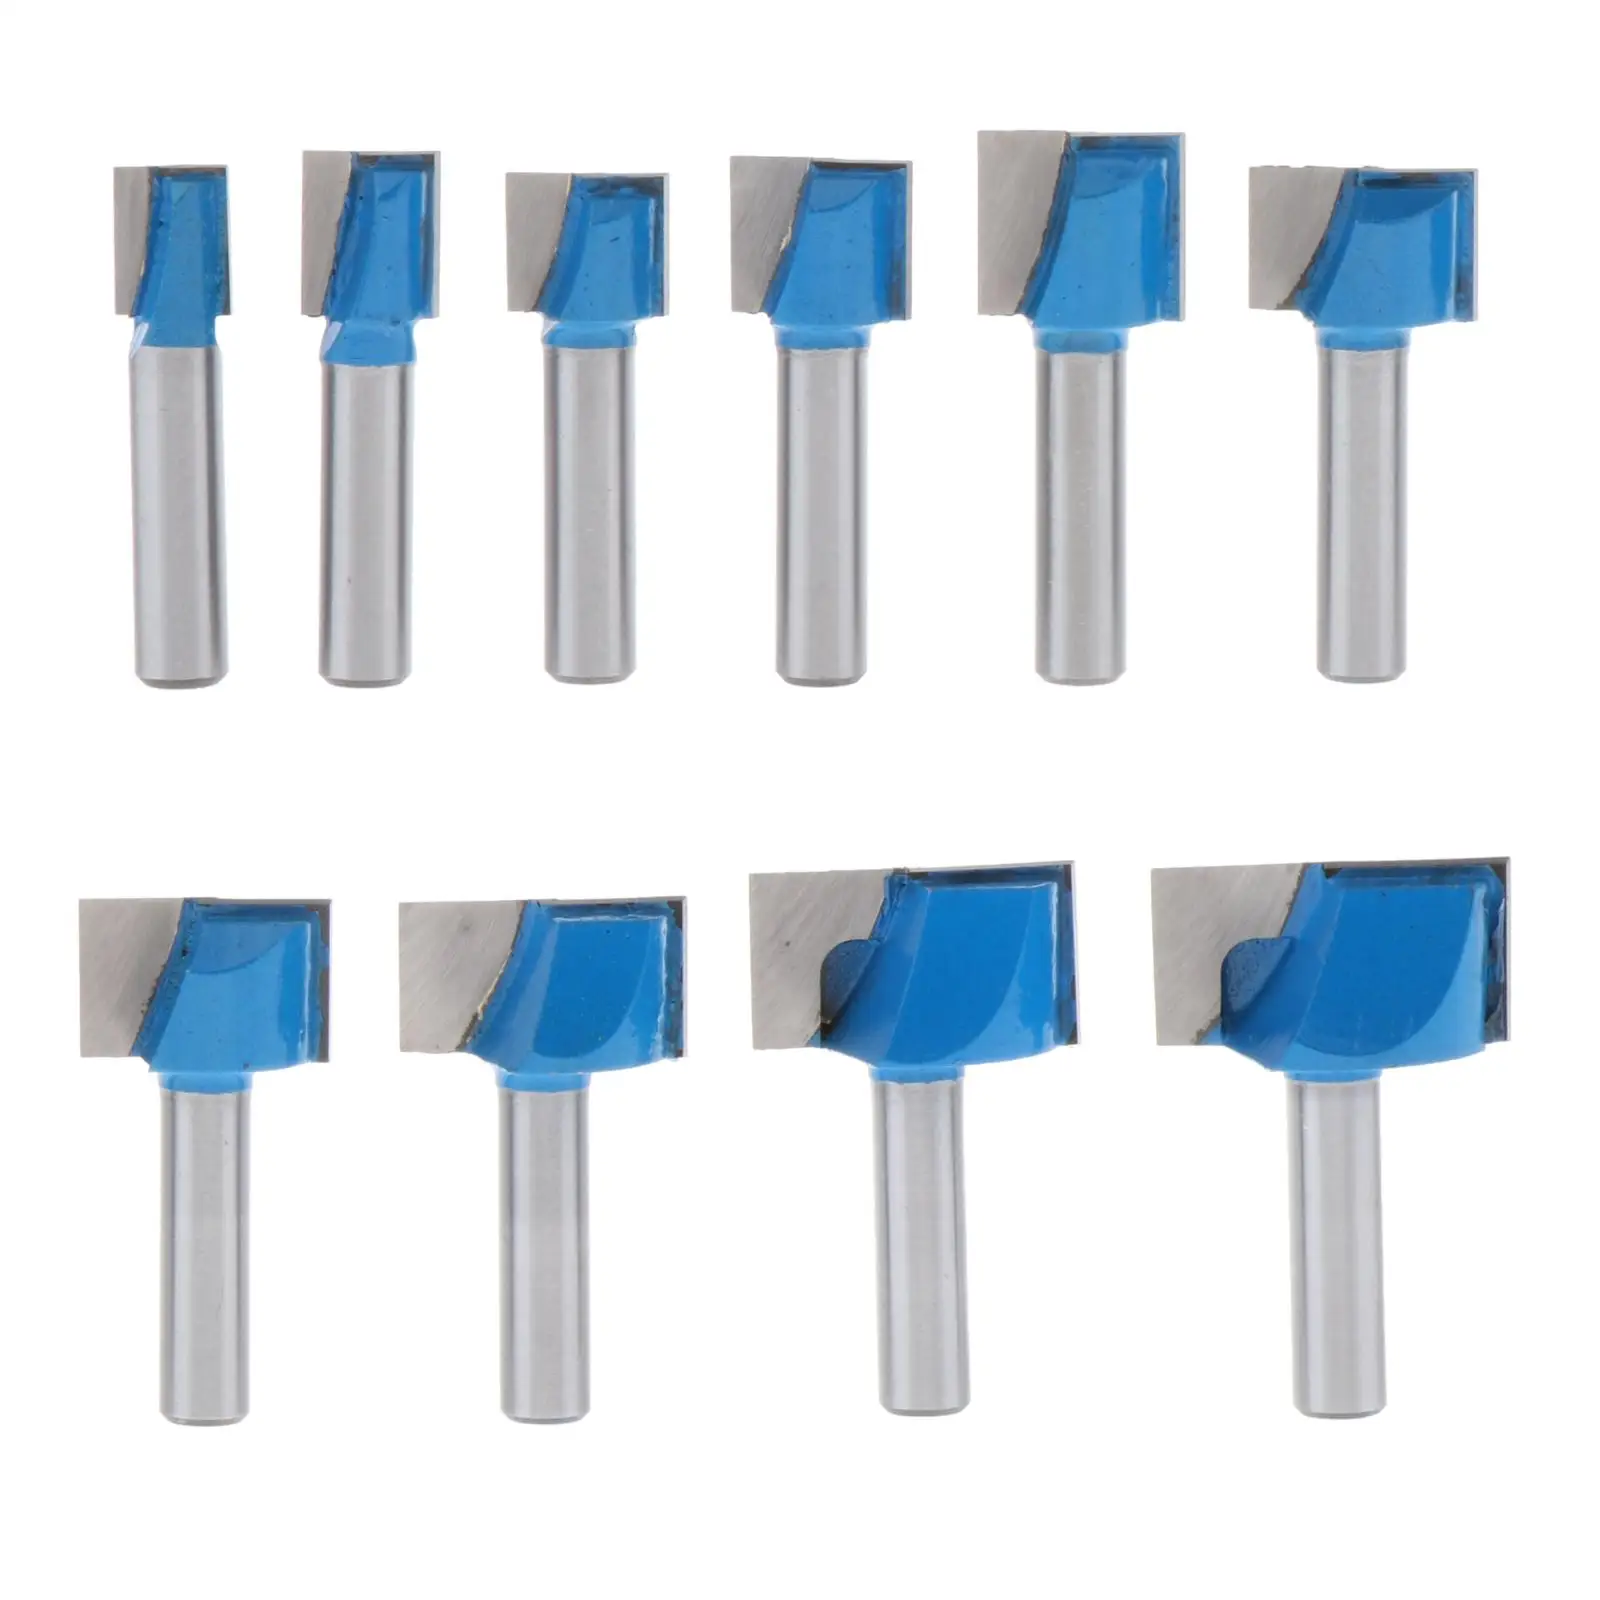 8mm Shank Bottom Cleaning Router Bit Set 10pcs Woodworking Surface Planing